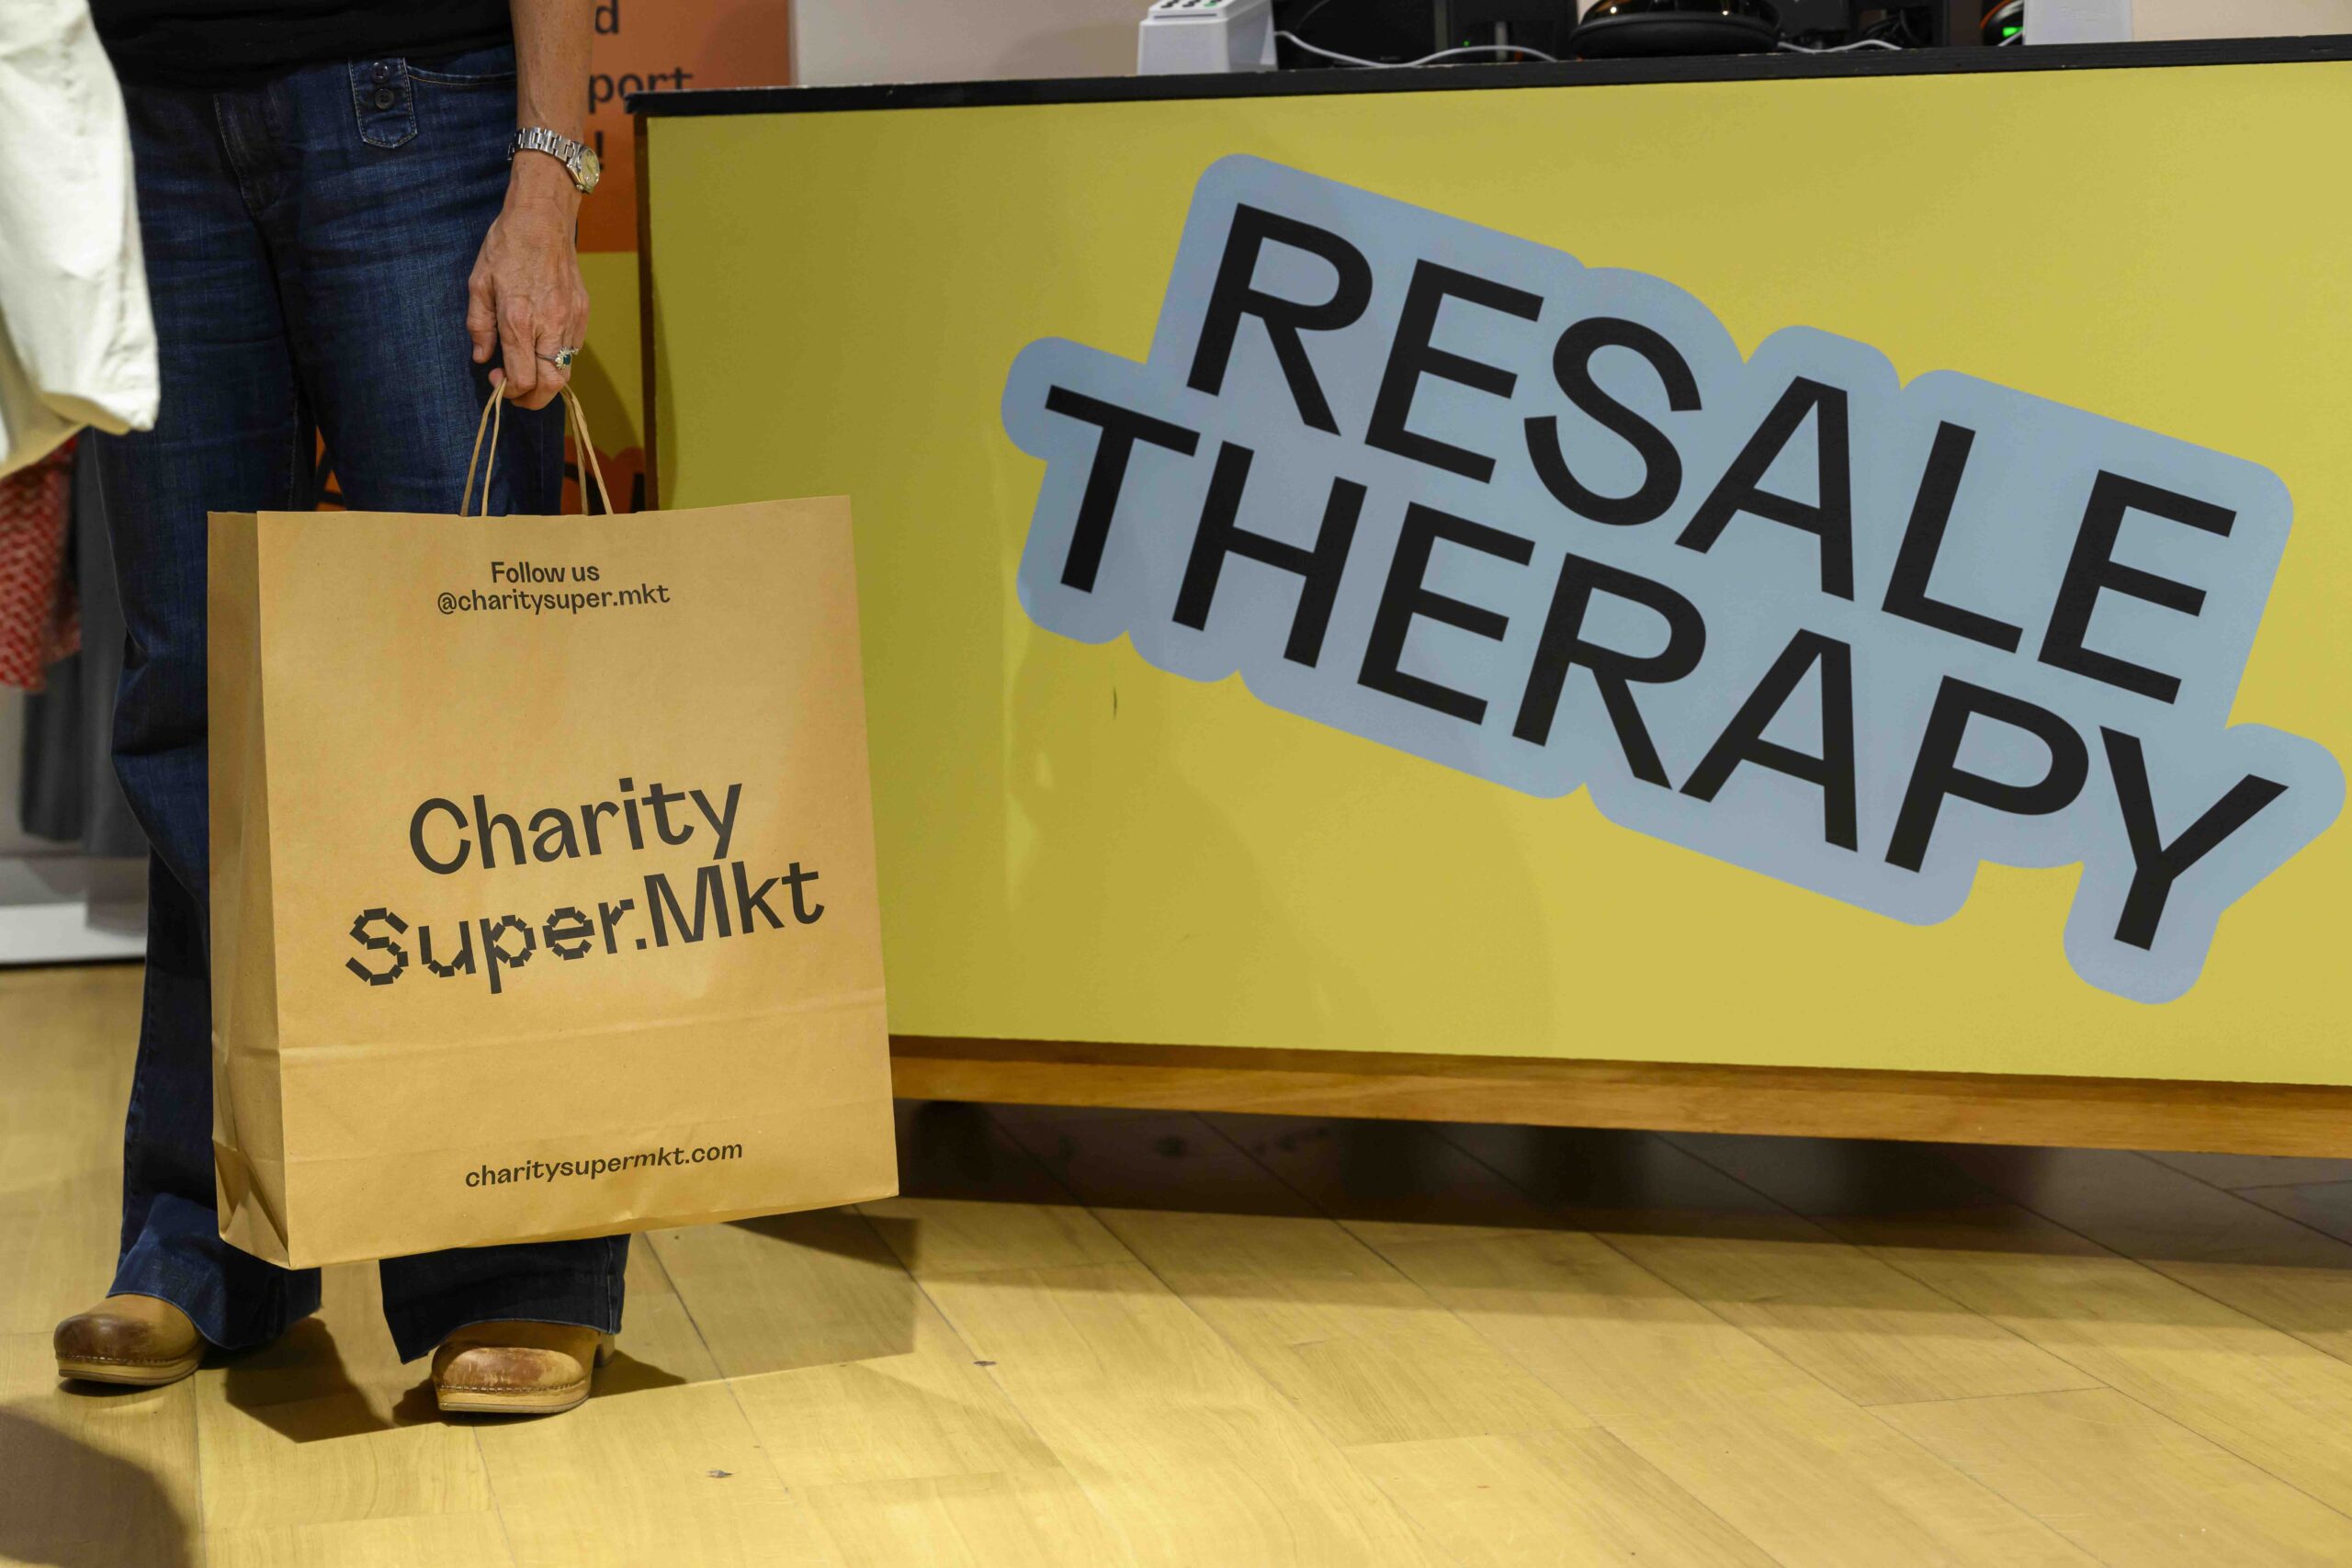 Charity Super.Mkt to open debut outlet store at Gloucester Quays